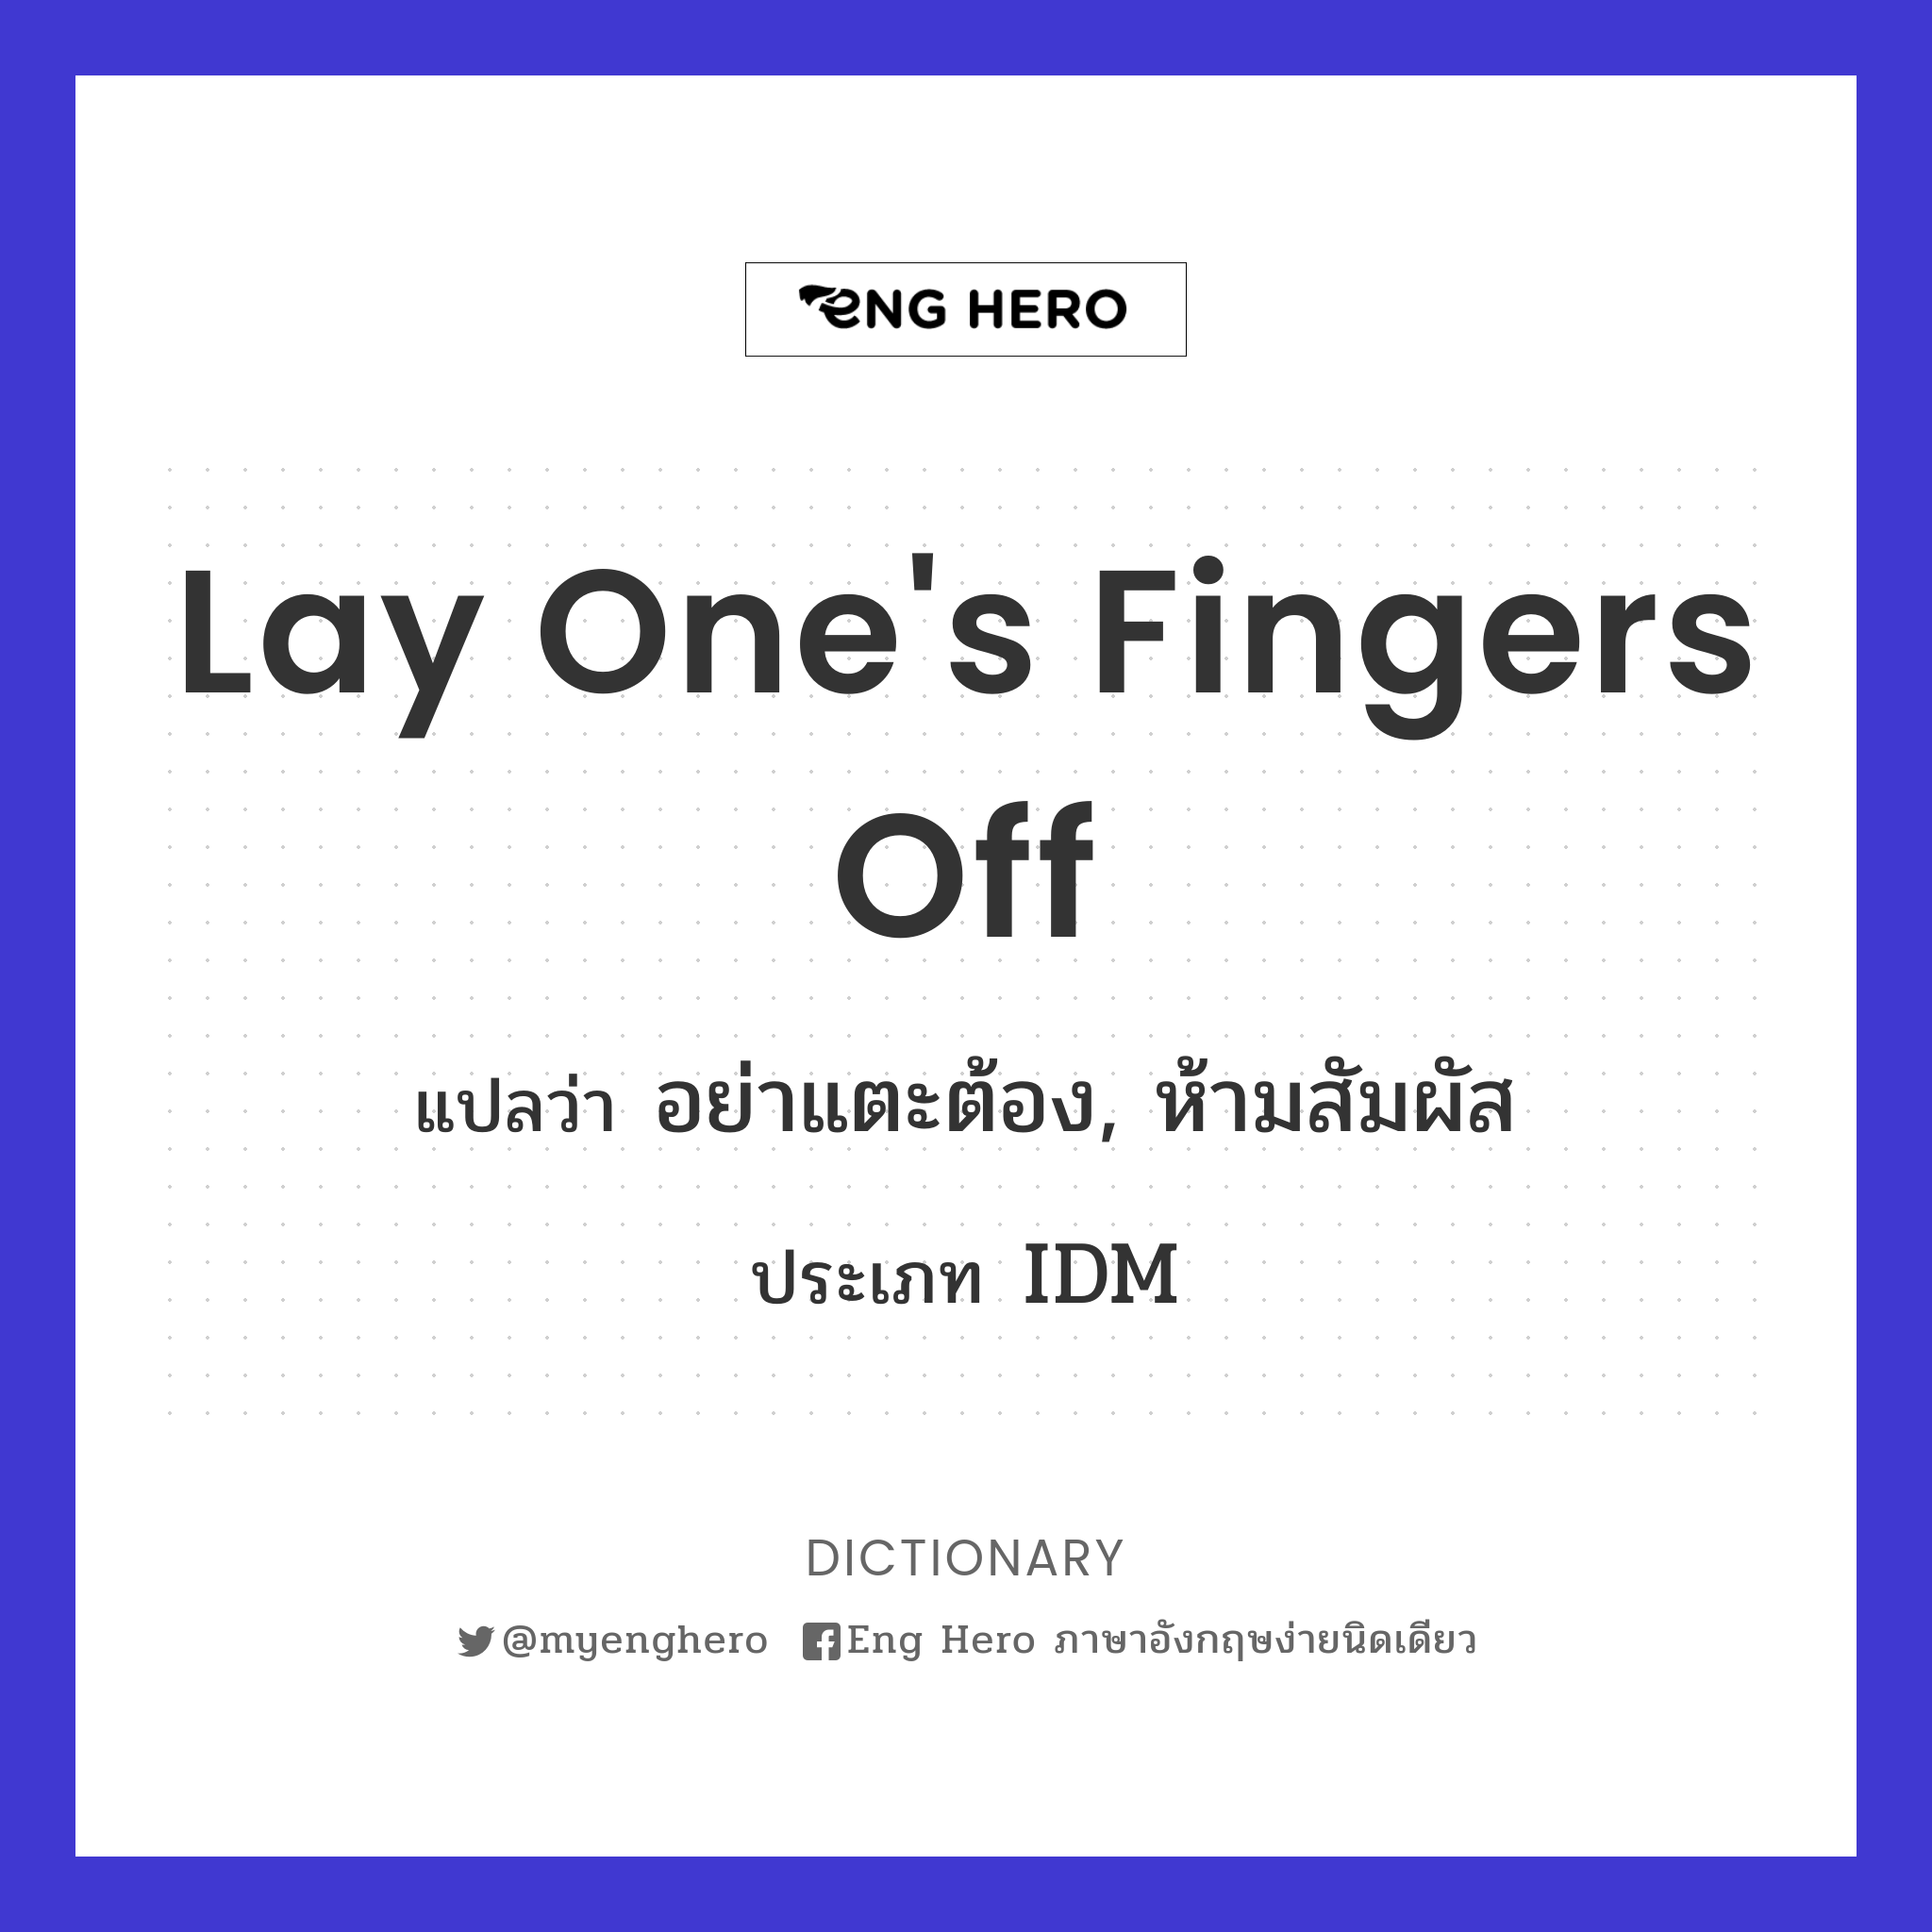 lay one's fingers off